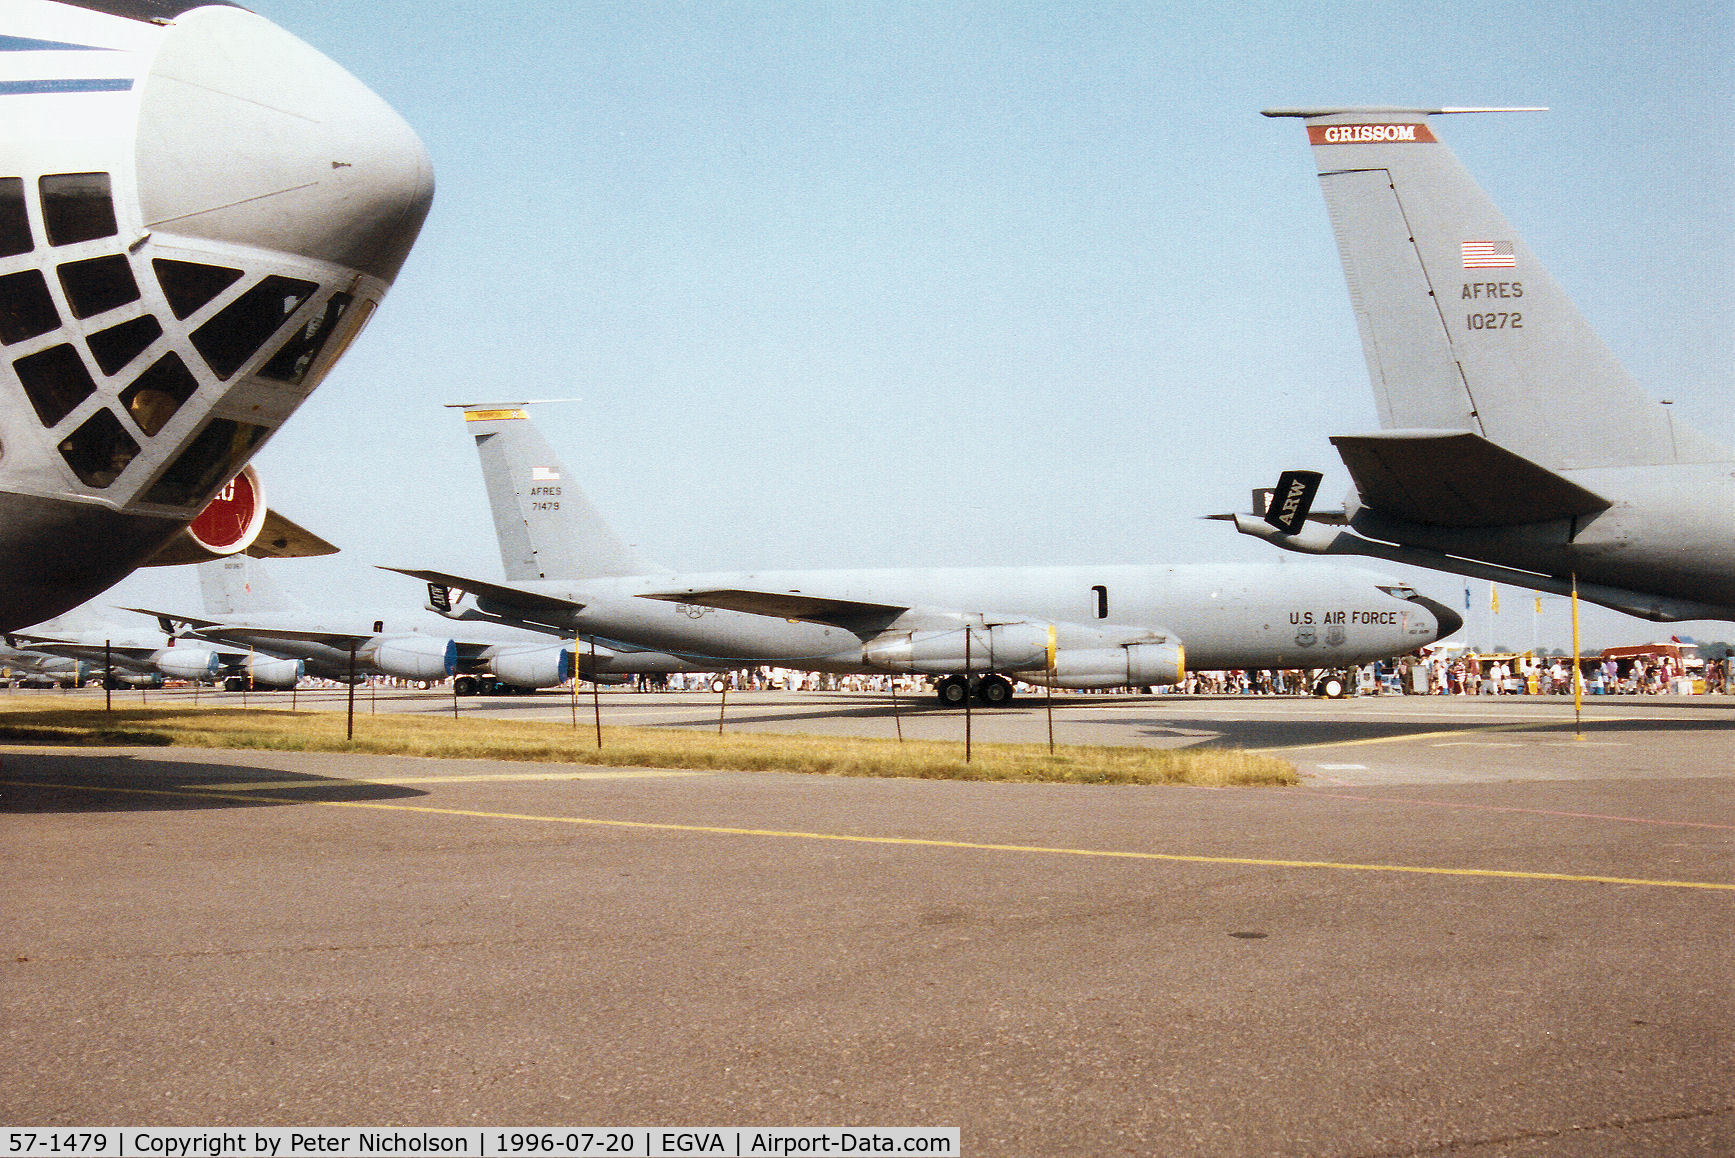 57-1479, 1957 Boeing KC-135E Stratotanker C/N 17550, KC-135E Stratotanker named Dark Horse of 336th Air Refuelling Squadron/452nd Air Mobility Wing at March AFB on display at the 1996 Royal Intnl Air Tattoo at RAF Fairford.